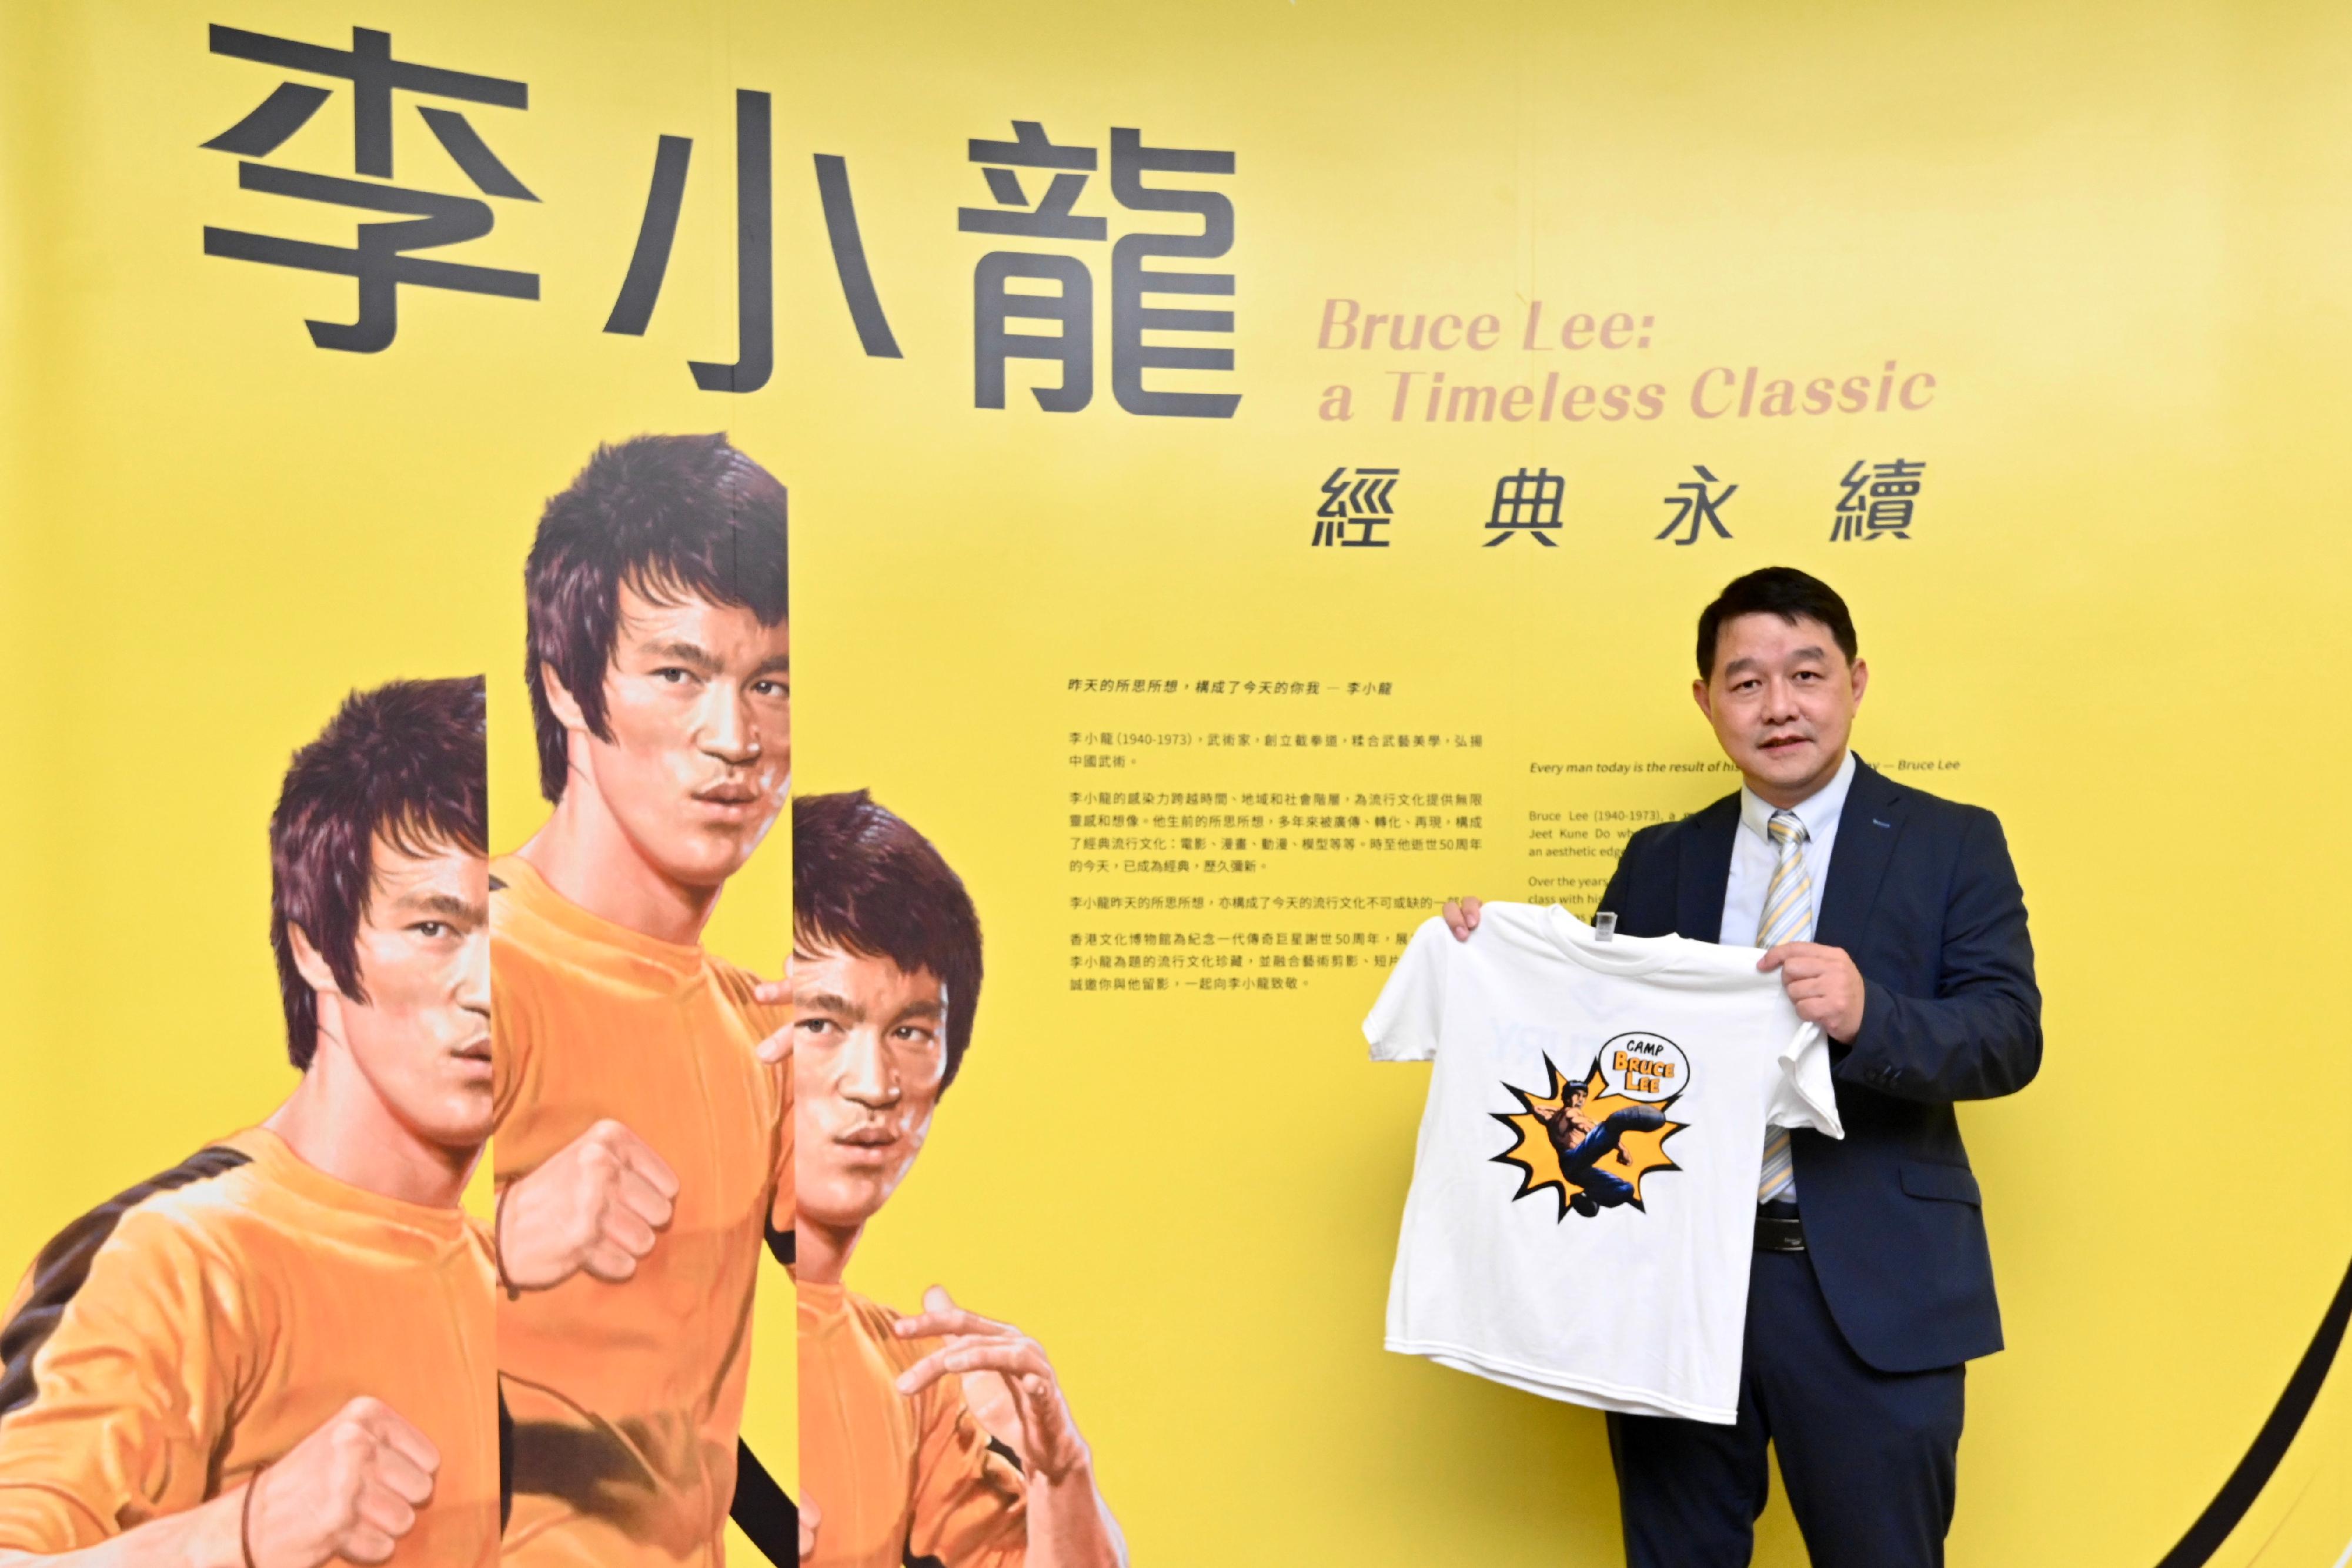 This year marks the 50th anniversary of the passing of the legend martial arts superstar Bruce Lee. The Hong Kong Heritage Museum (HKHM) will launch a series of programmes in July to pay tribute to Bruce Lee including a pop-up display "Bruce Lee: a Timeless Classic", screenings of movies "The Kid", "The Way of the Dragon", "The Big Boss" and "Fist of Fury" starring him, and the launch of Asia's first Camp Bruce Lee Hong Kong 2023 in collaboration with Bruce Lee Foundation. Photo shows the Museum Director of the HKHM, Mr Brian Lam, introducing the programmes.